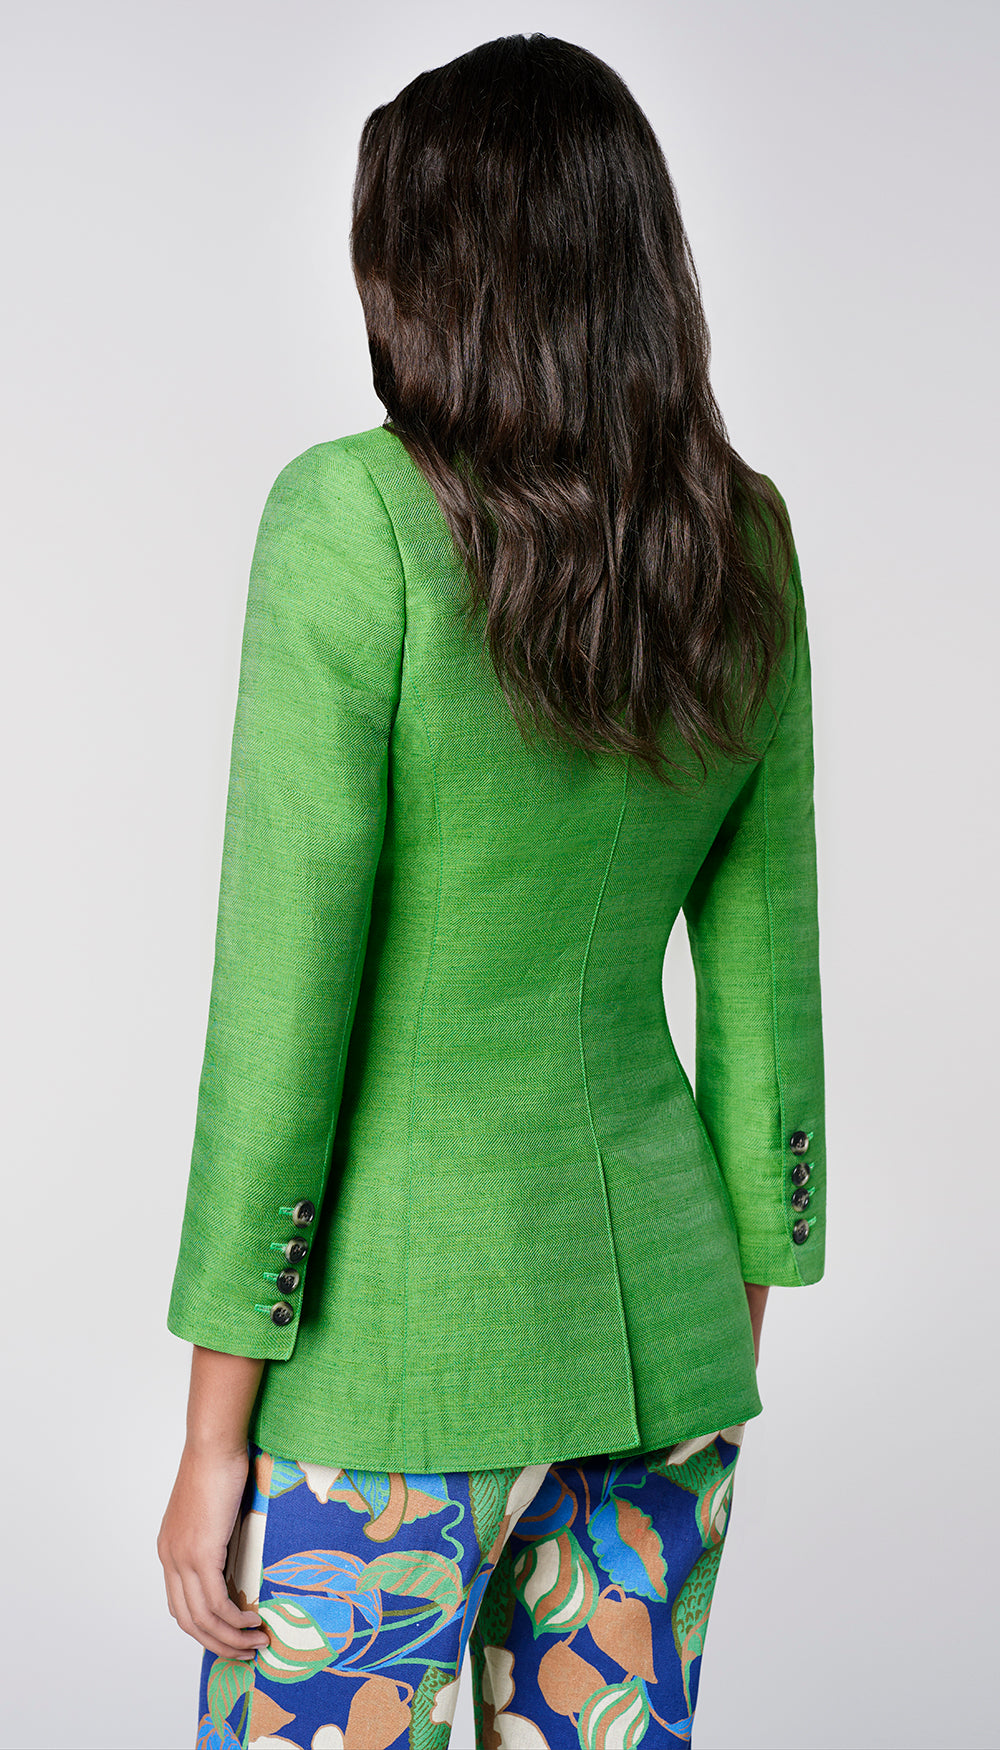 The back of a woman in a green blazer.